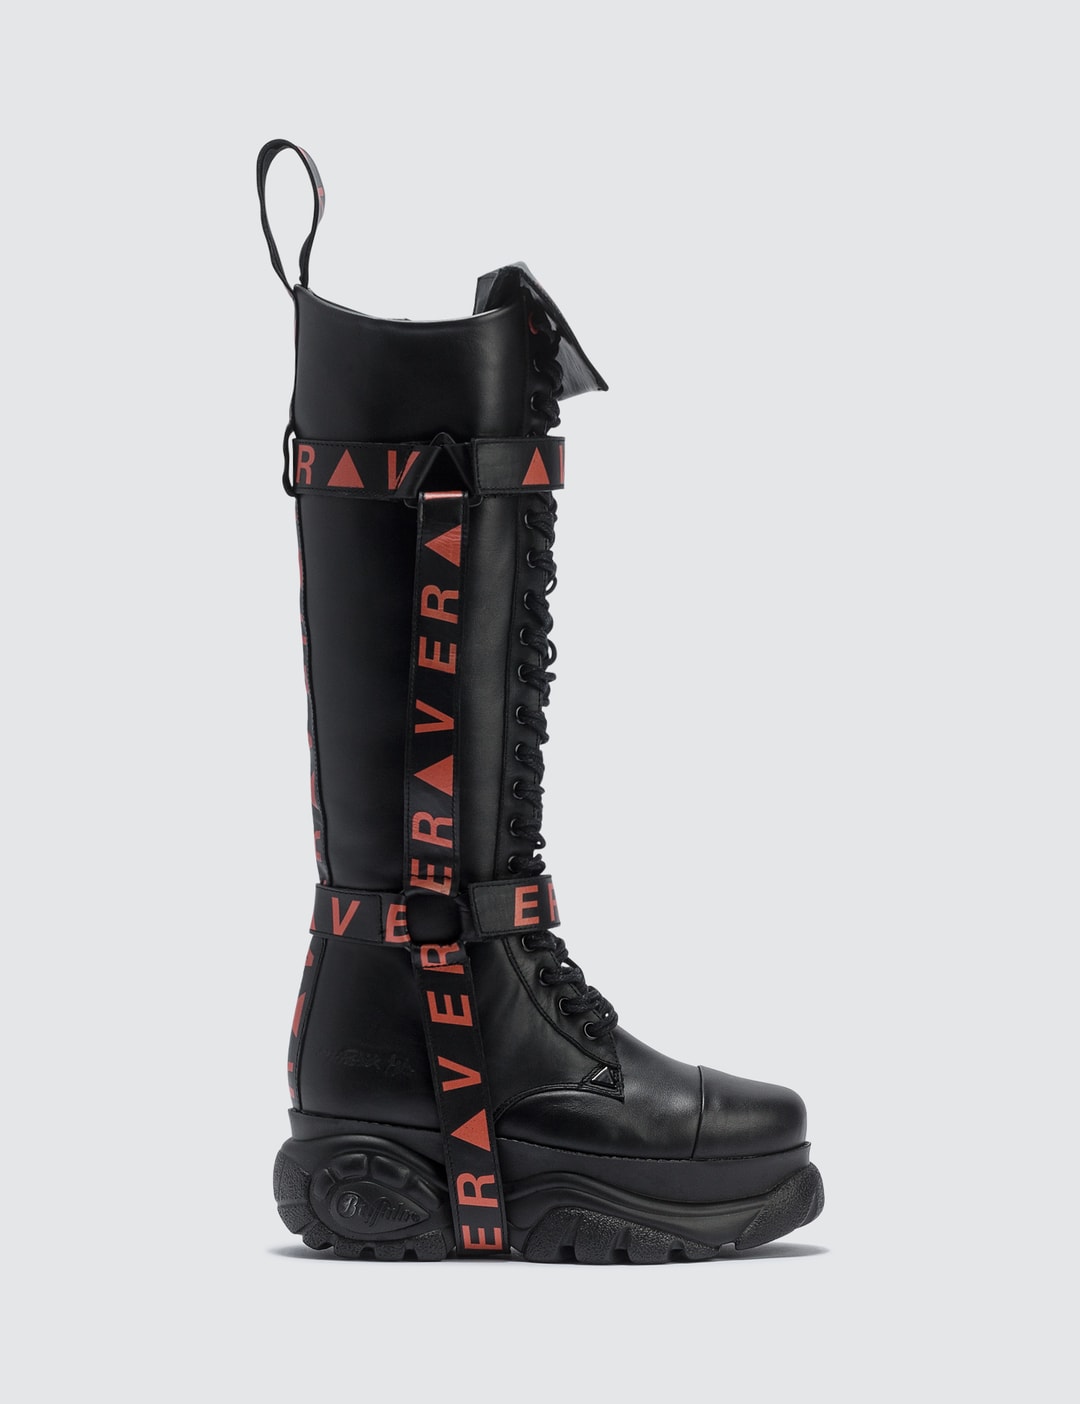 Buffalo London - X Patrick Mohr Rave High Boots | HBX - Globally Curated Fashion and Lifestyle by Hypebeast